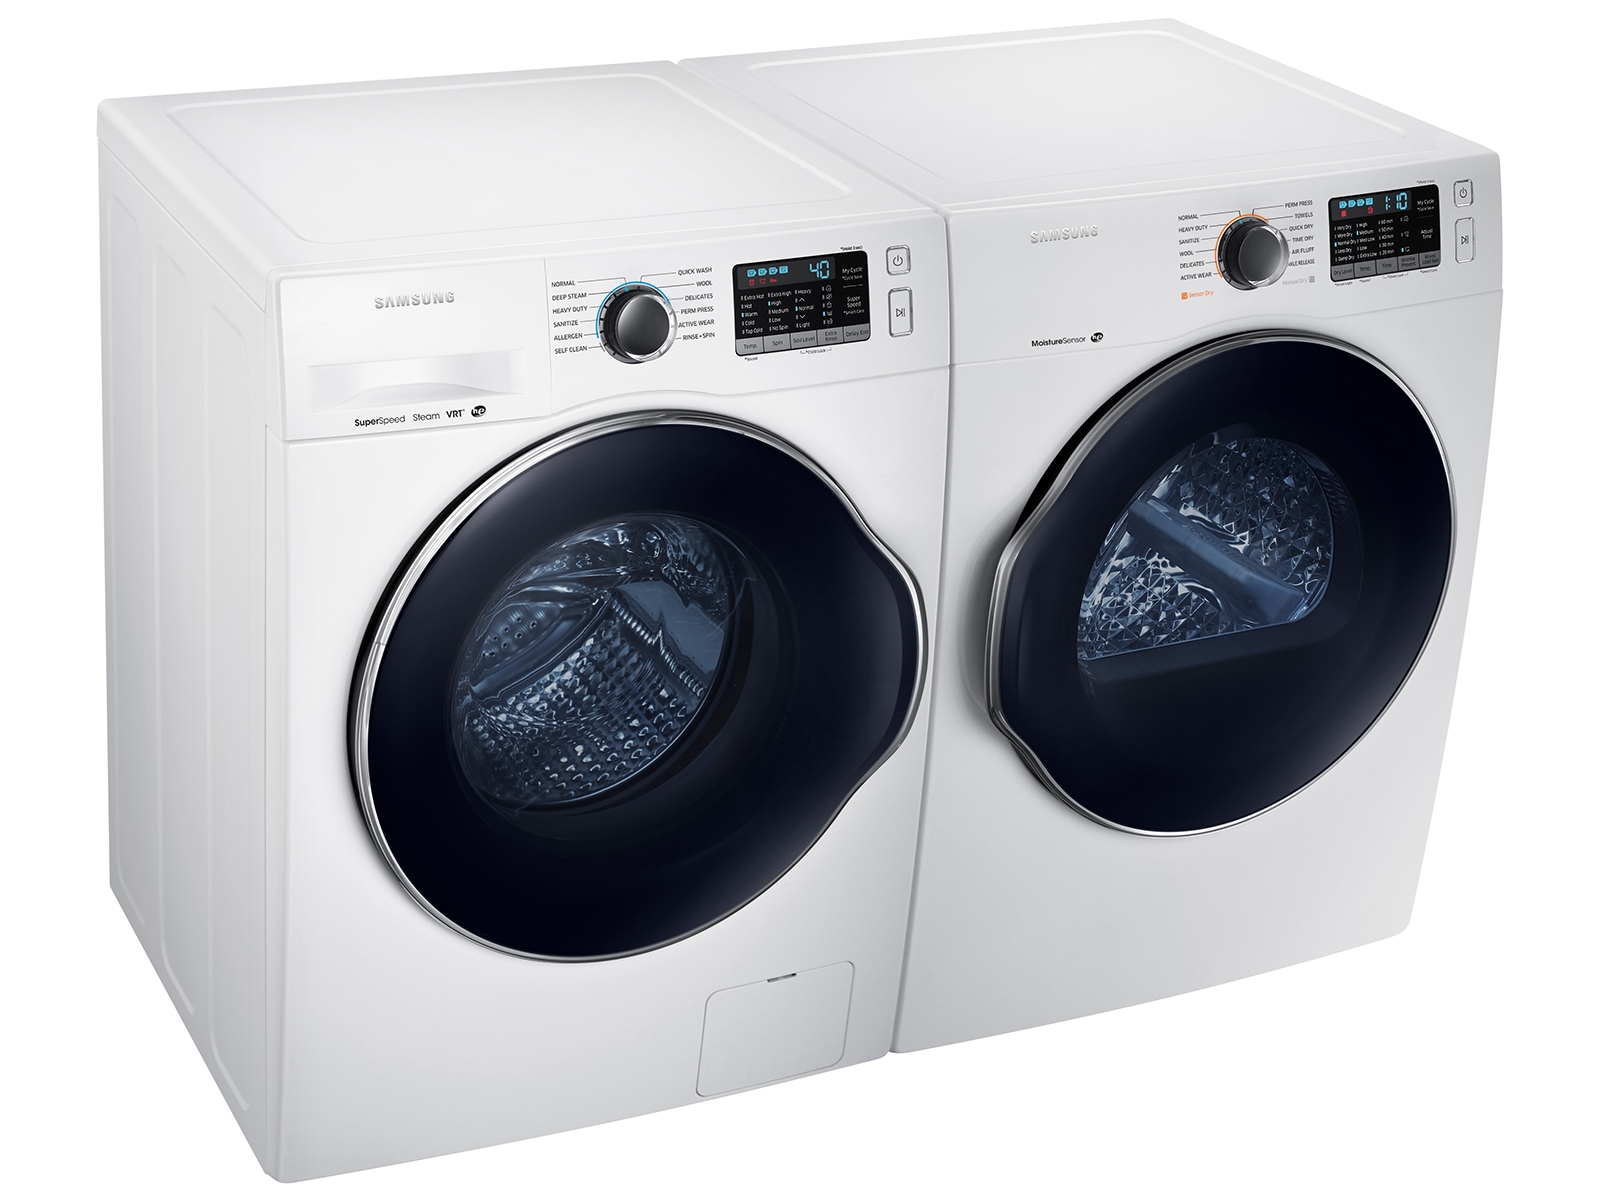 LG 2.2 Cu. Ft. High-Efficiency Compact Front-Load Washer with